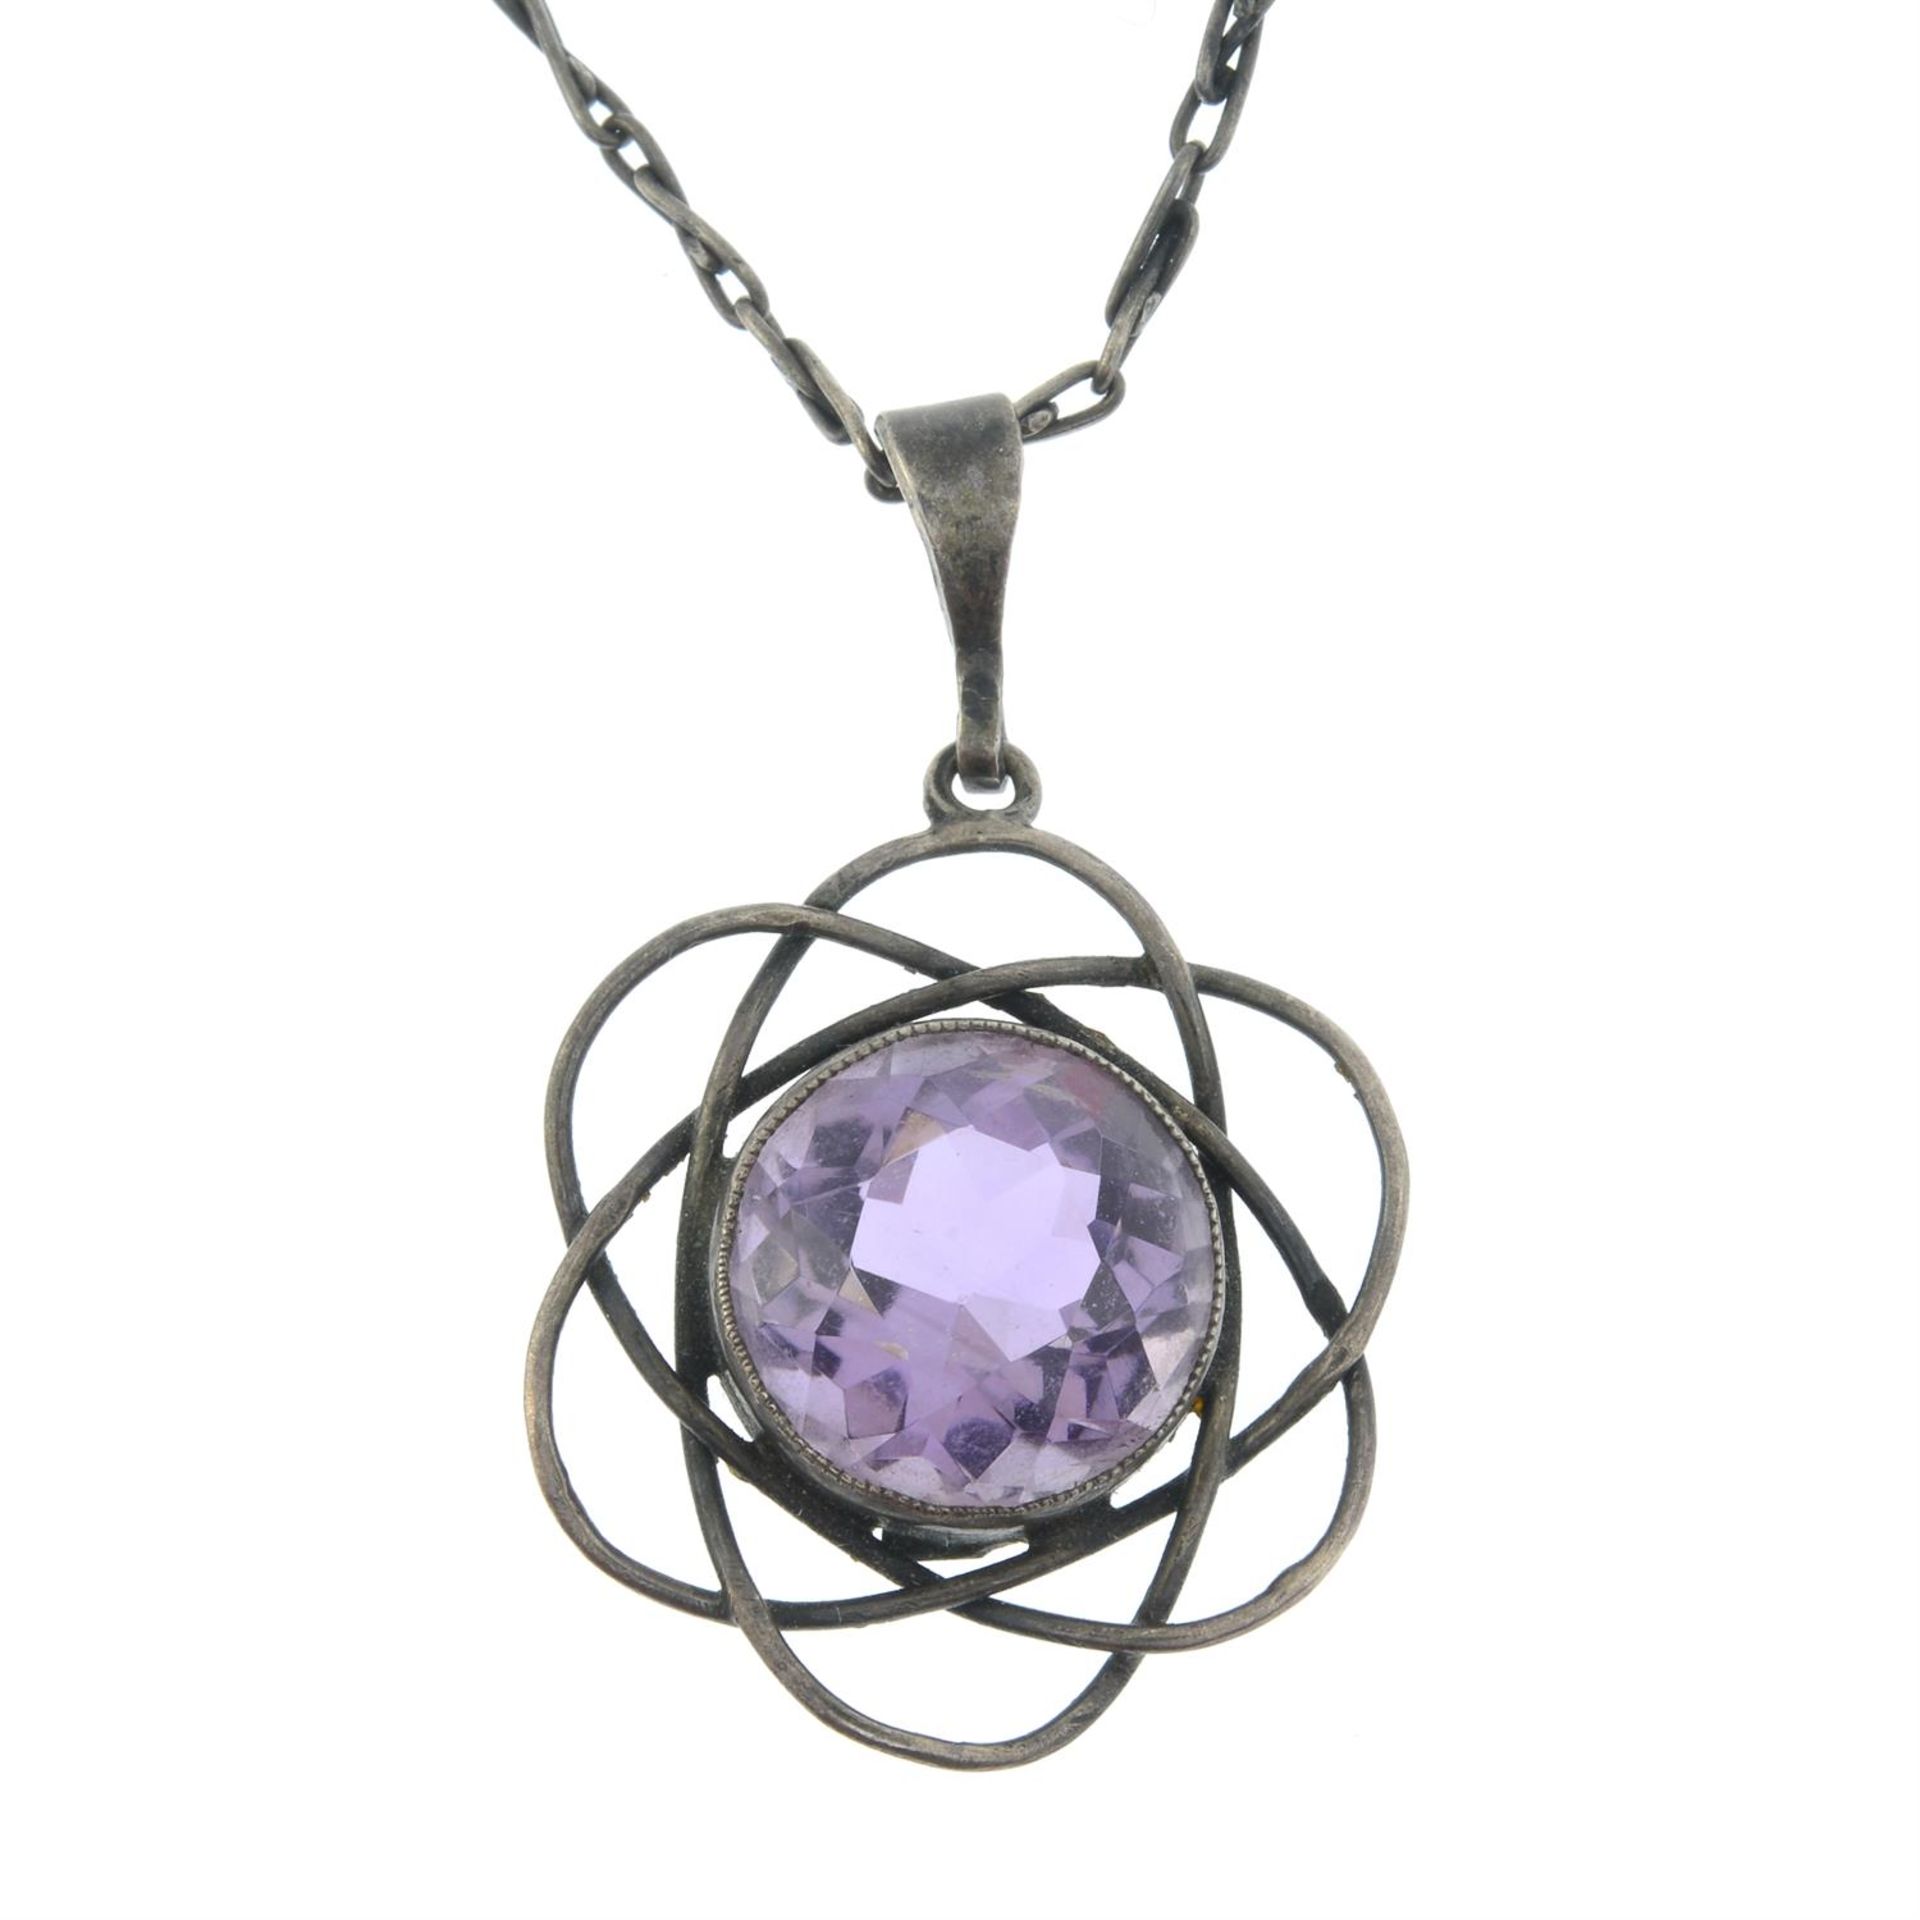 A silver amethyst openwork pendant and chain, by Liberty & Co.